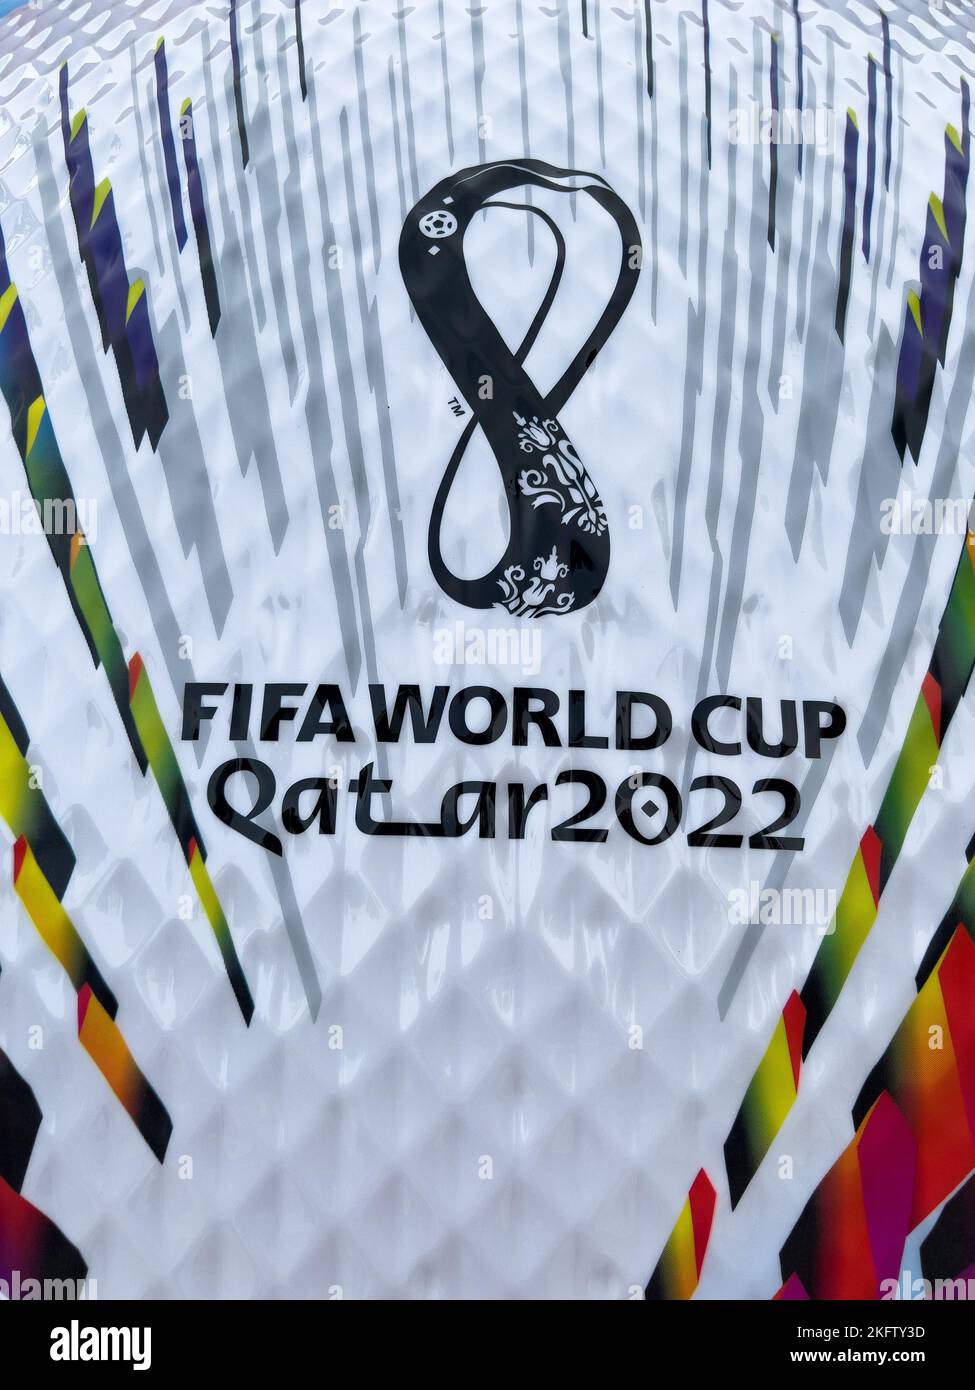 Giant size of FIFA World Cup Qatar 2022 official football on display in public area. The ball is name 'Al Rihla', meaning The Journey in Arabic. Stock Photo